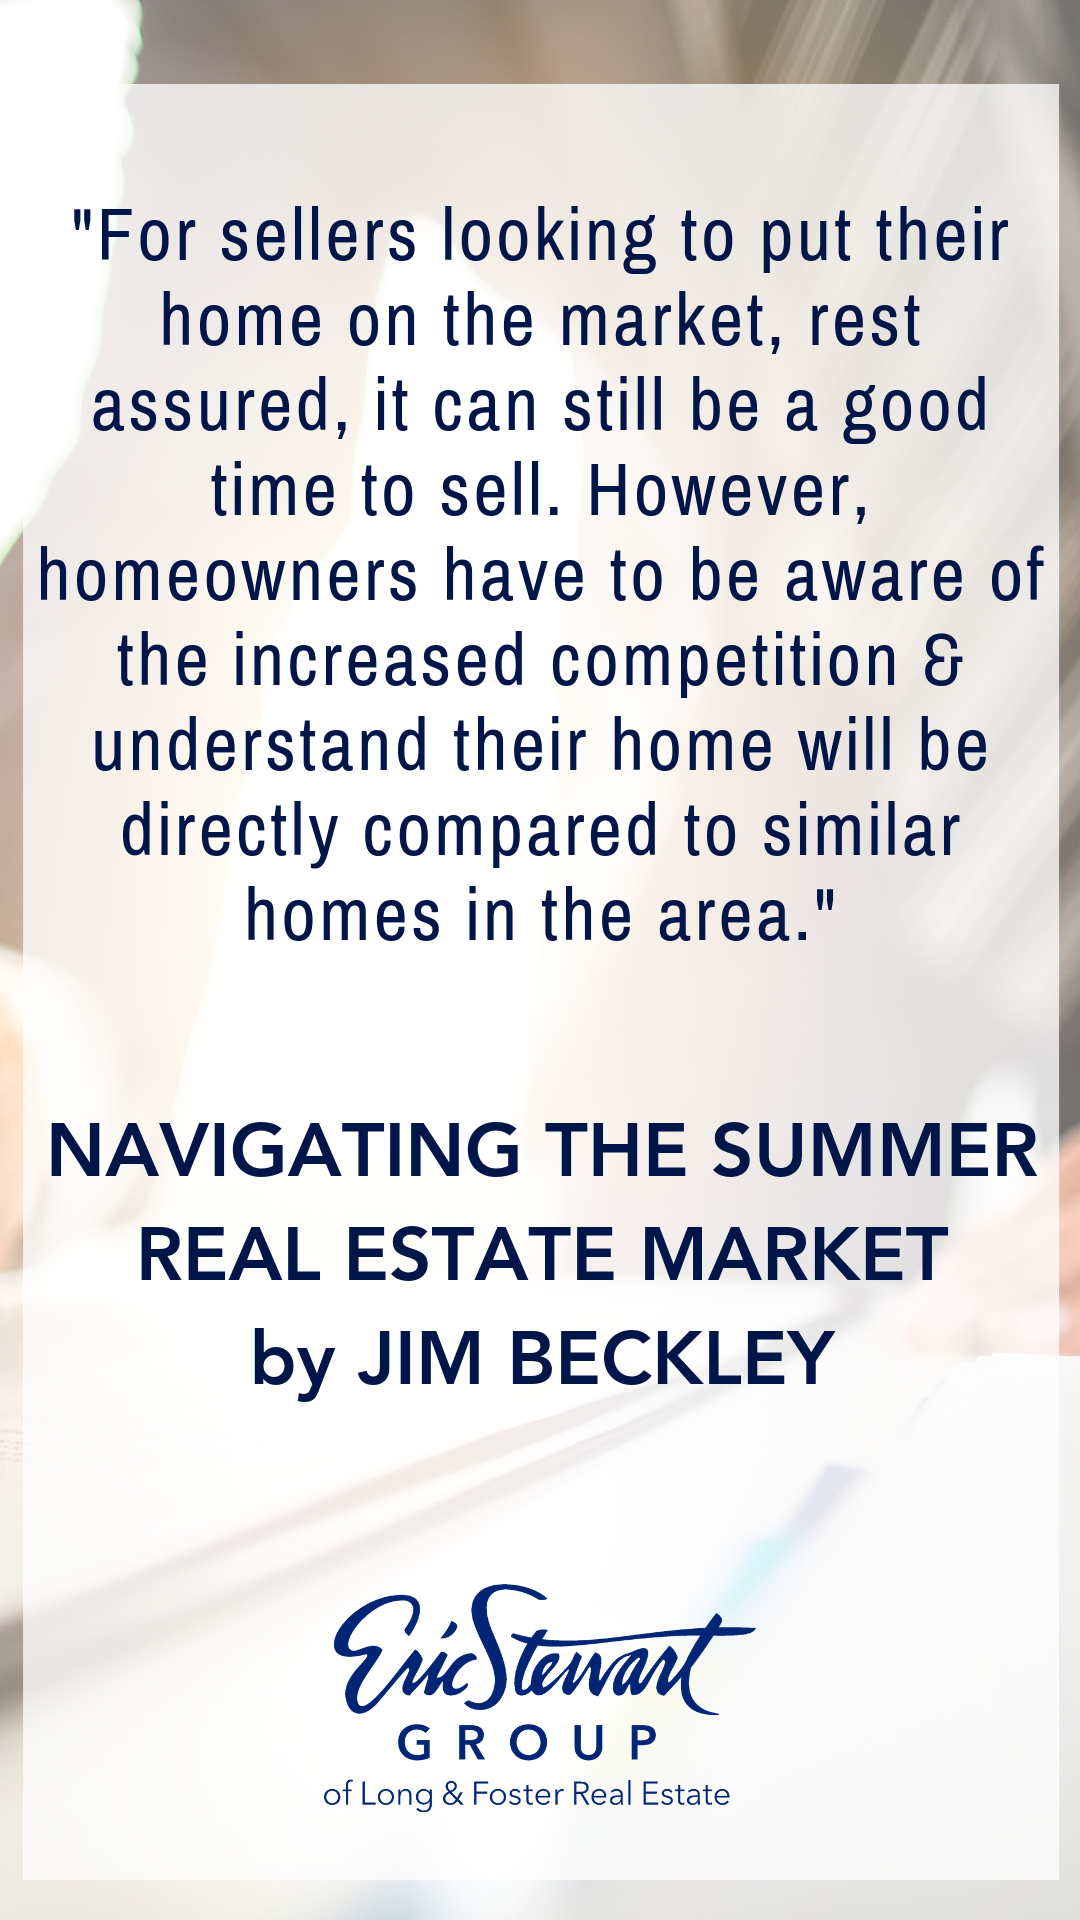 _For sellers looking to put their home on the market, rest assured, it can still be a good time to sell. However, homeowners have to be aware of the increased competition & understand their home will be directly comp